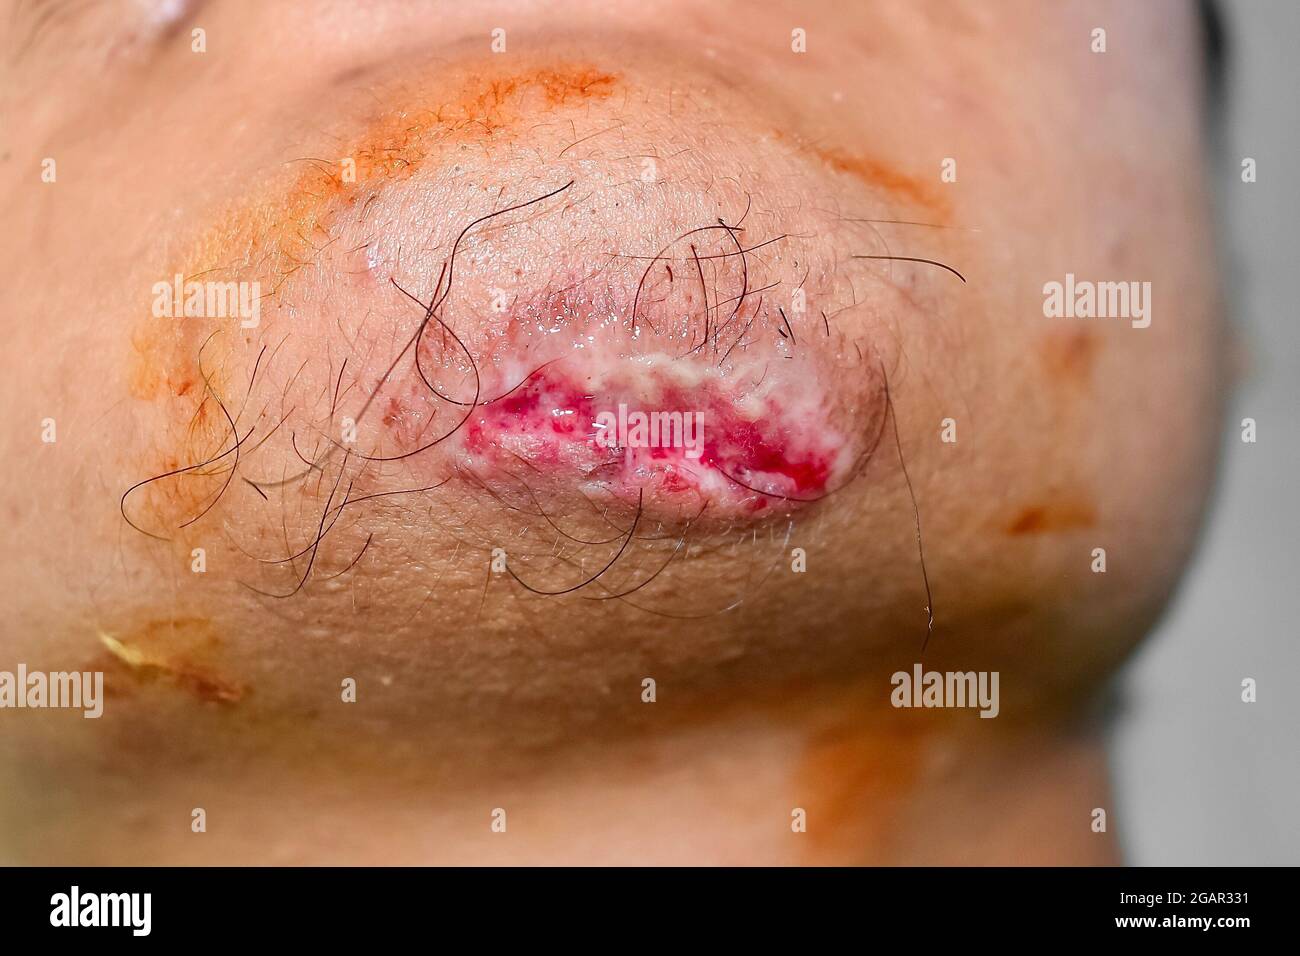 Small lacerated wound in chin of Asian man. Closeup view. Stock Photo